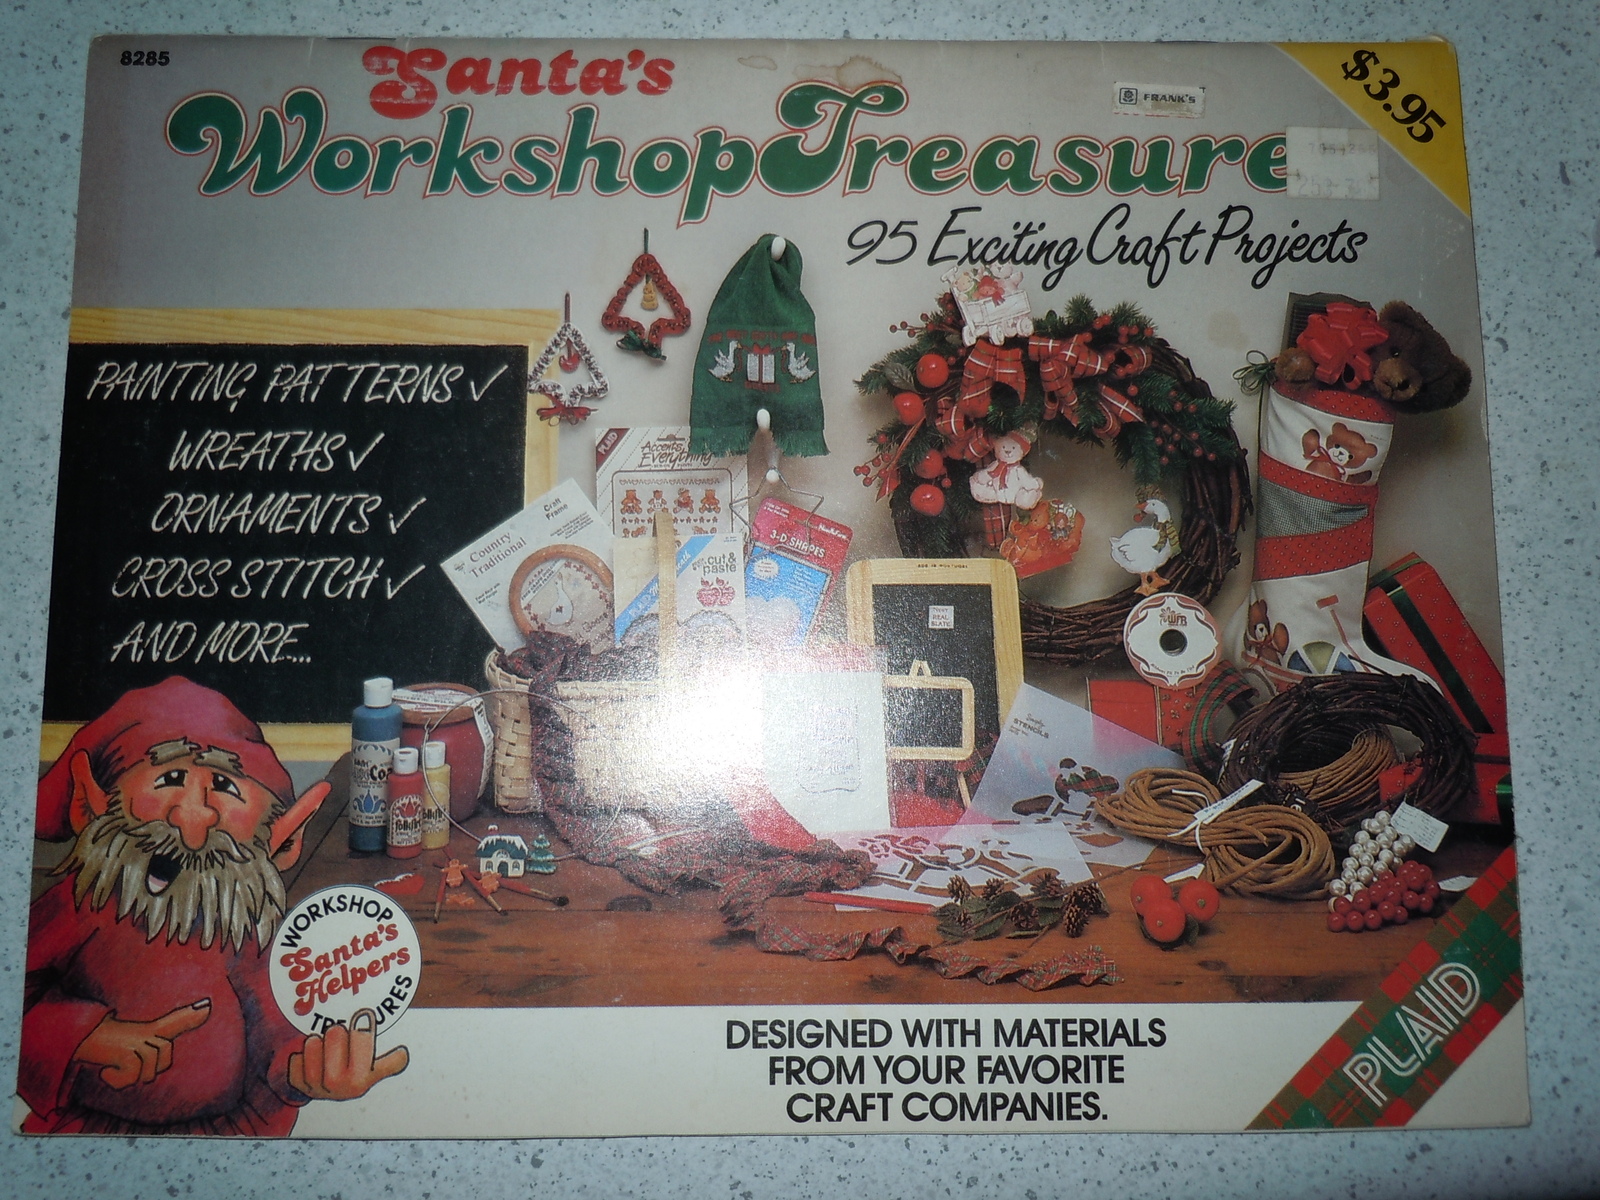 Primary image for Santa’s Workshop treasure 95 Exciting Craft Projects Plaid